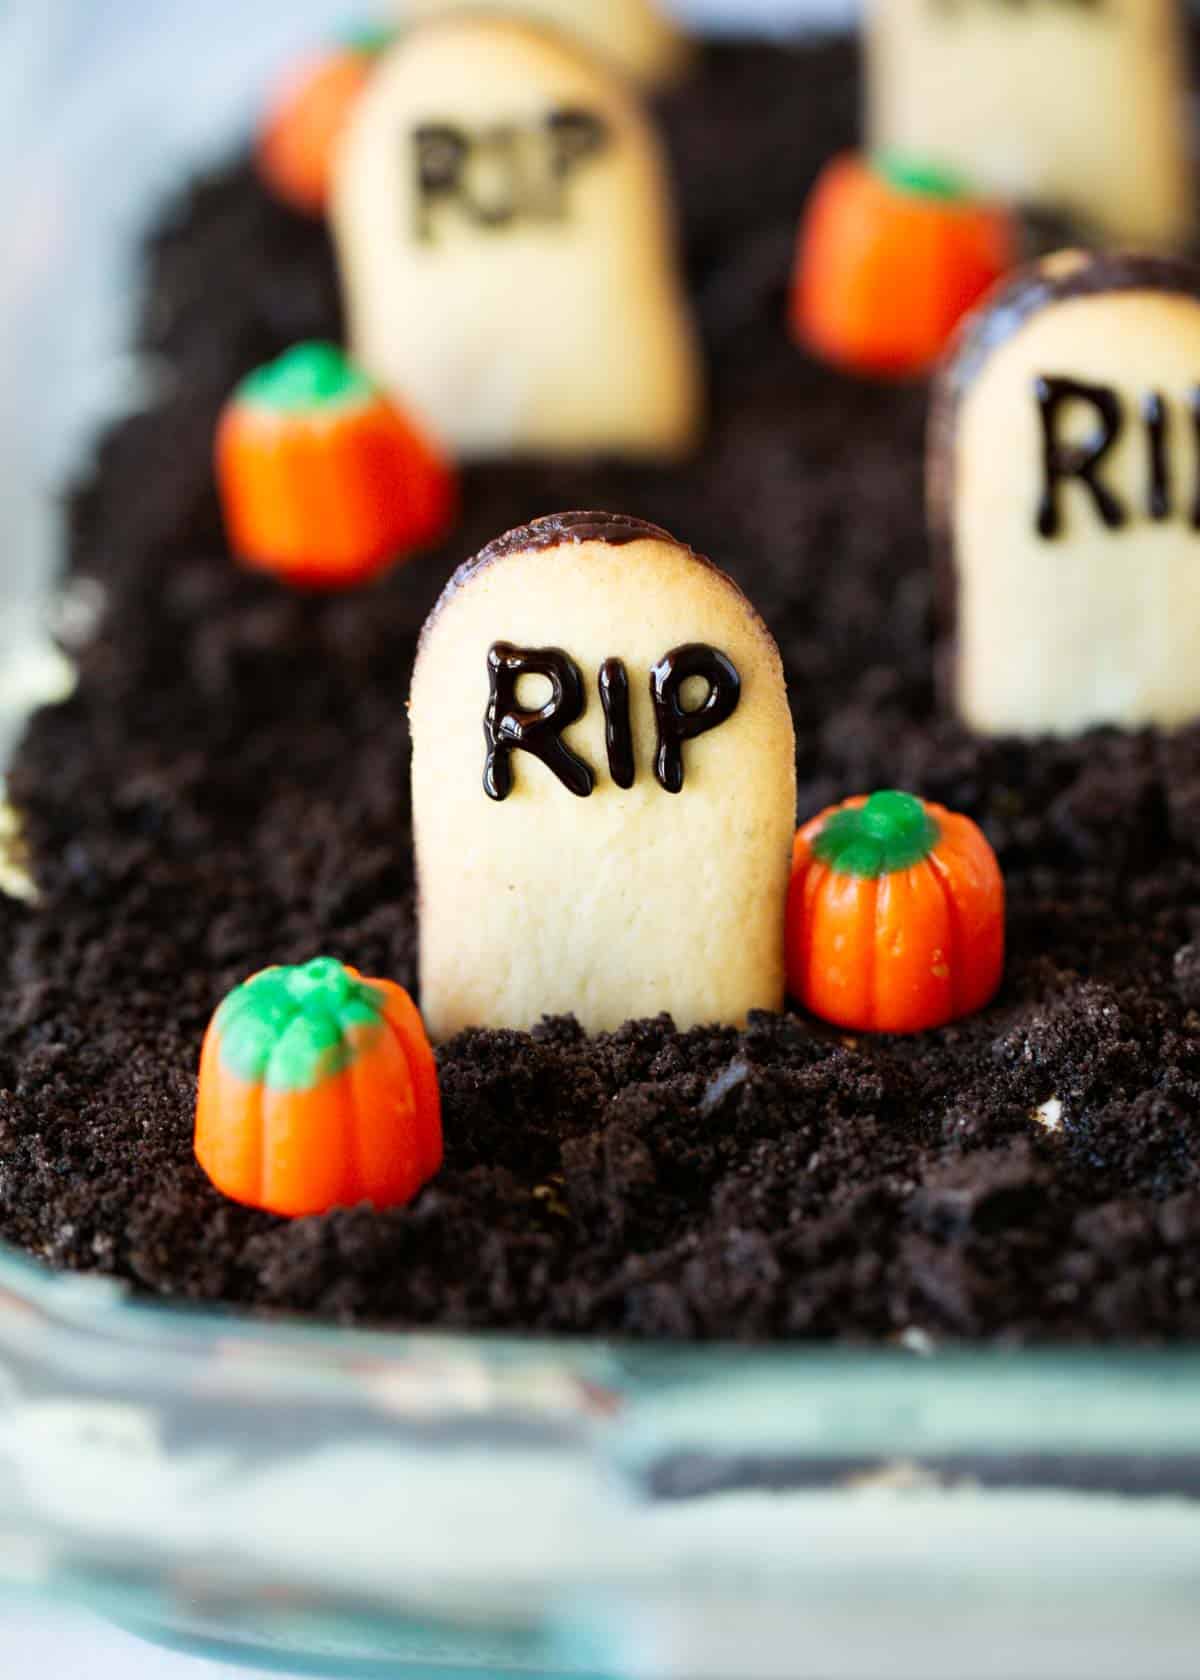 Oreo dirt cake in a glass dish with pumpkins on top.